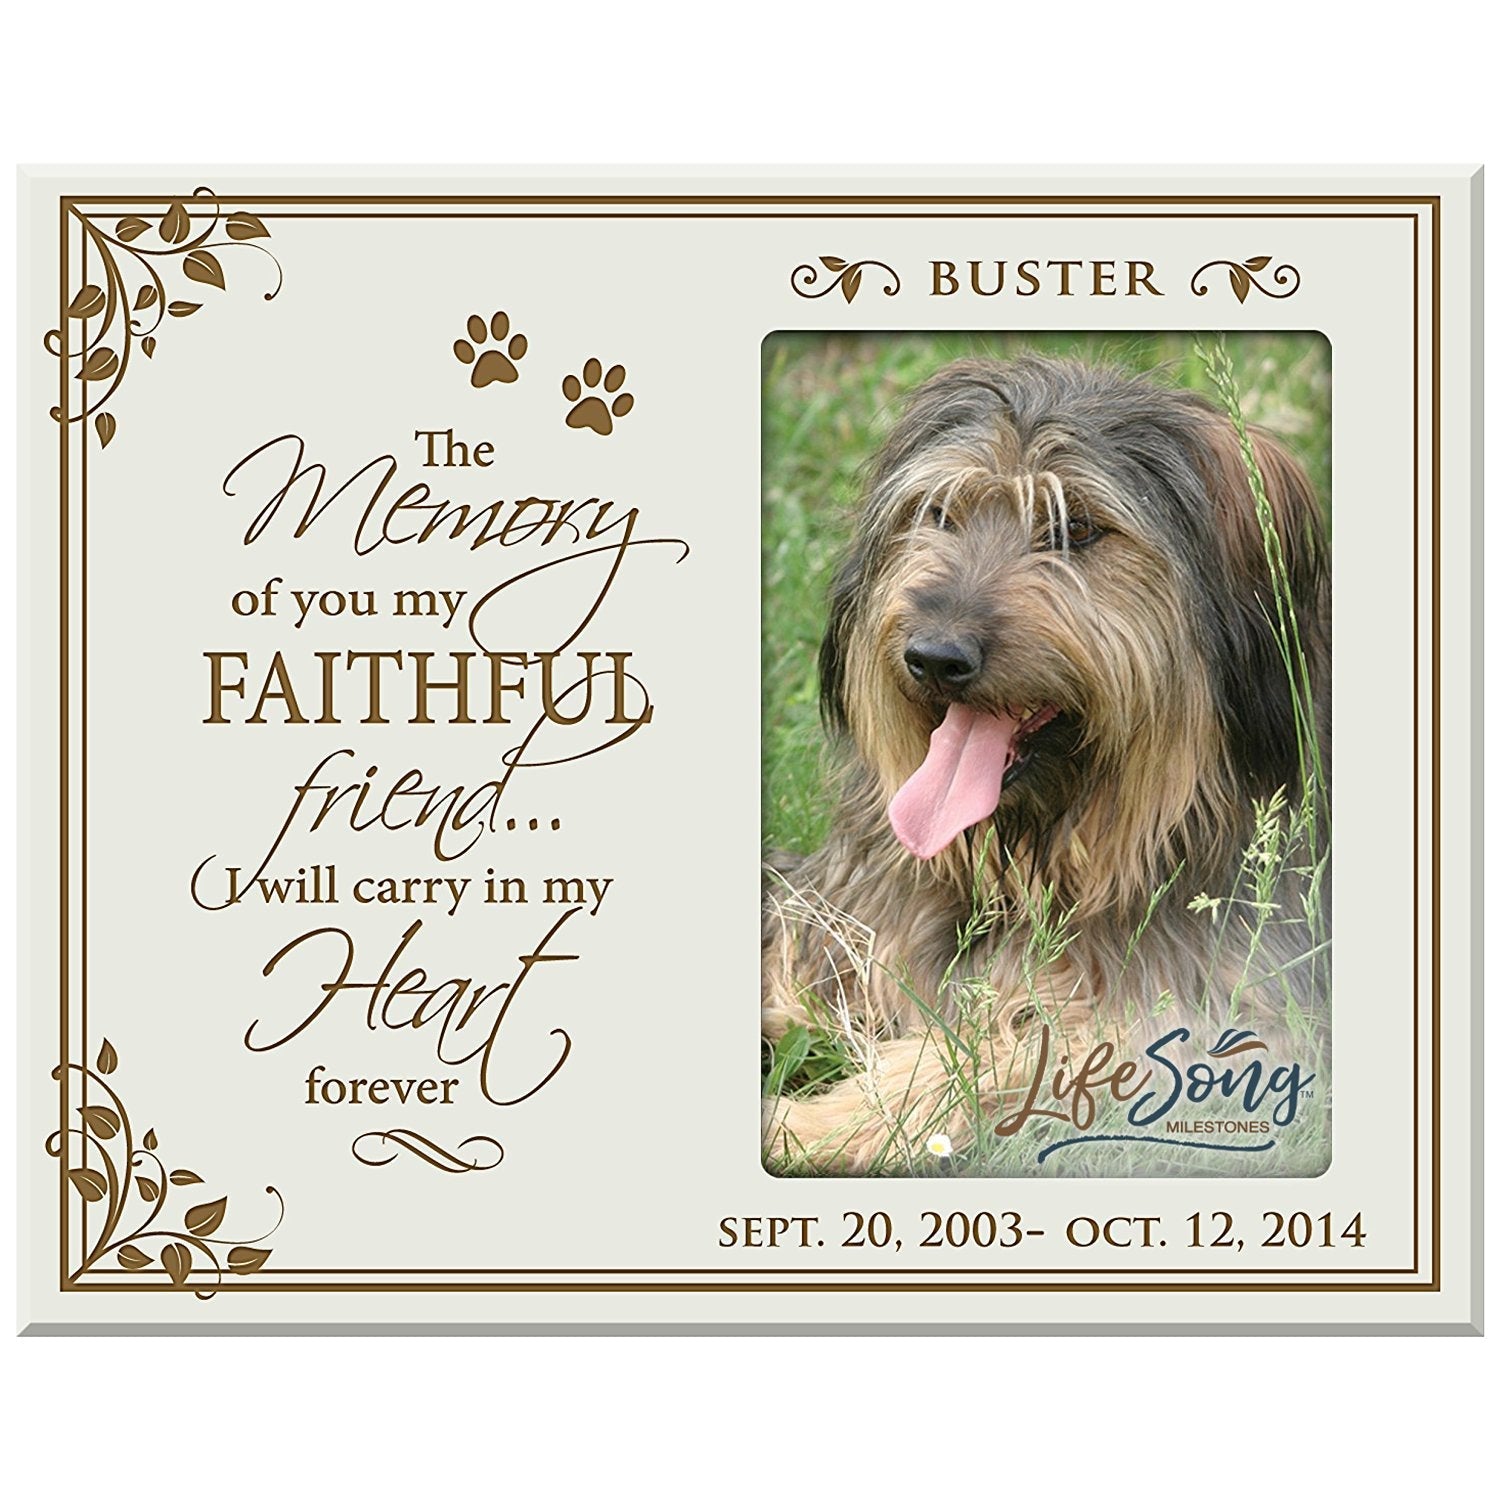 8x10 Ivory Pet Memorial Picture Frame with the phrase "In Memory of You My Faithful Friend"